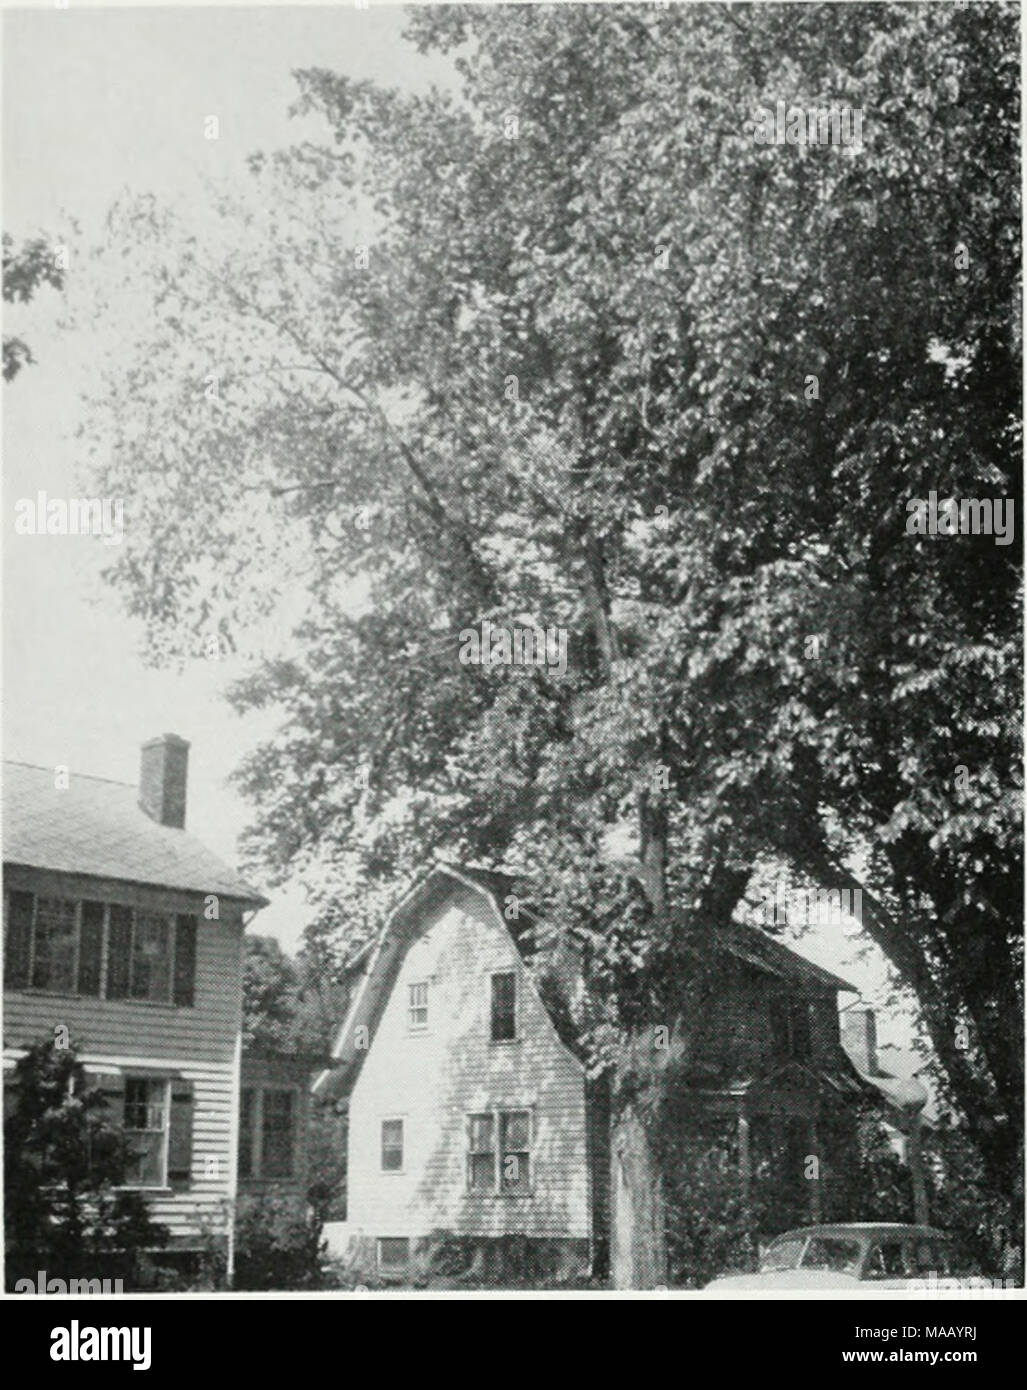 . Dutch elm disease in Illinois . Fig. 1. The earliest visible symptoms of Dutch elm disease are the wilting, curling, and yel- lowing of leaves on one or a few branches. On this tree the wilted and curled leaves are evident on the branch at the left. wilt and die rapidly probably became infected during the previous growing season, at which time they would have shown no wilt symp- toms or only limited and relatively inconspicuous symptoms. Brown streaking develops in the sapwood of diseased branches. It appears mostly in the springwood of the current-season growth. In a cross-section of a bran Stock Photo